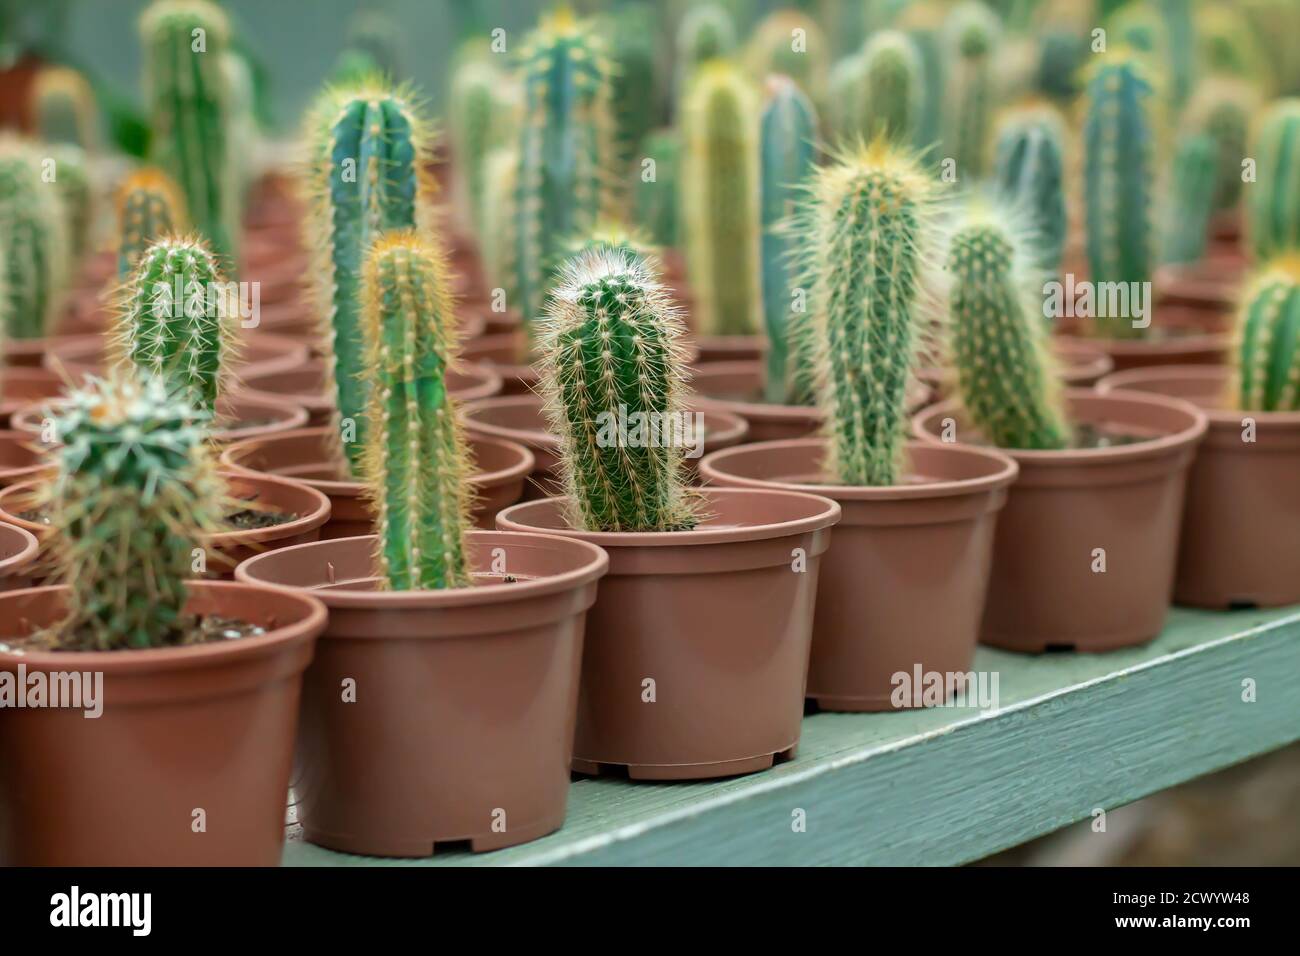 A lot of potted small cactus plants sale on store counter Stock Photo